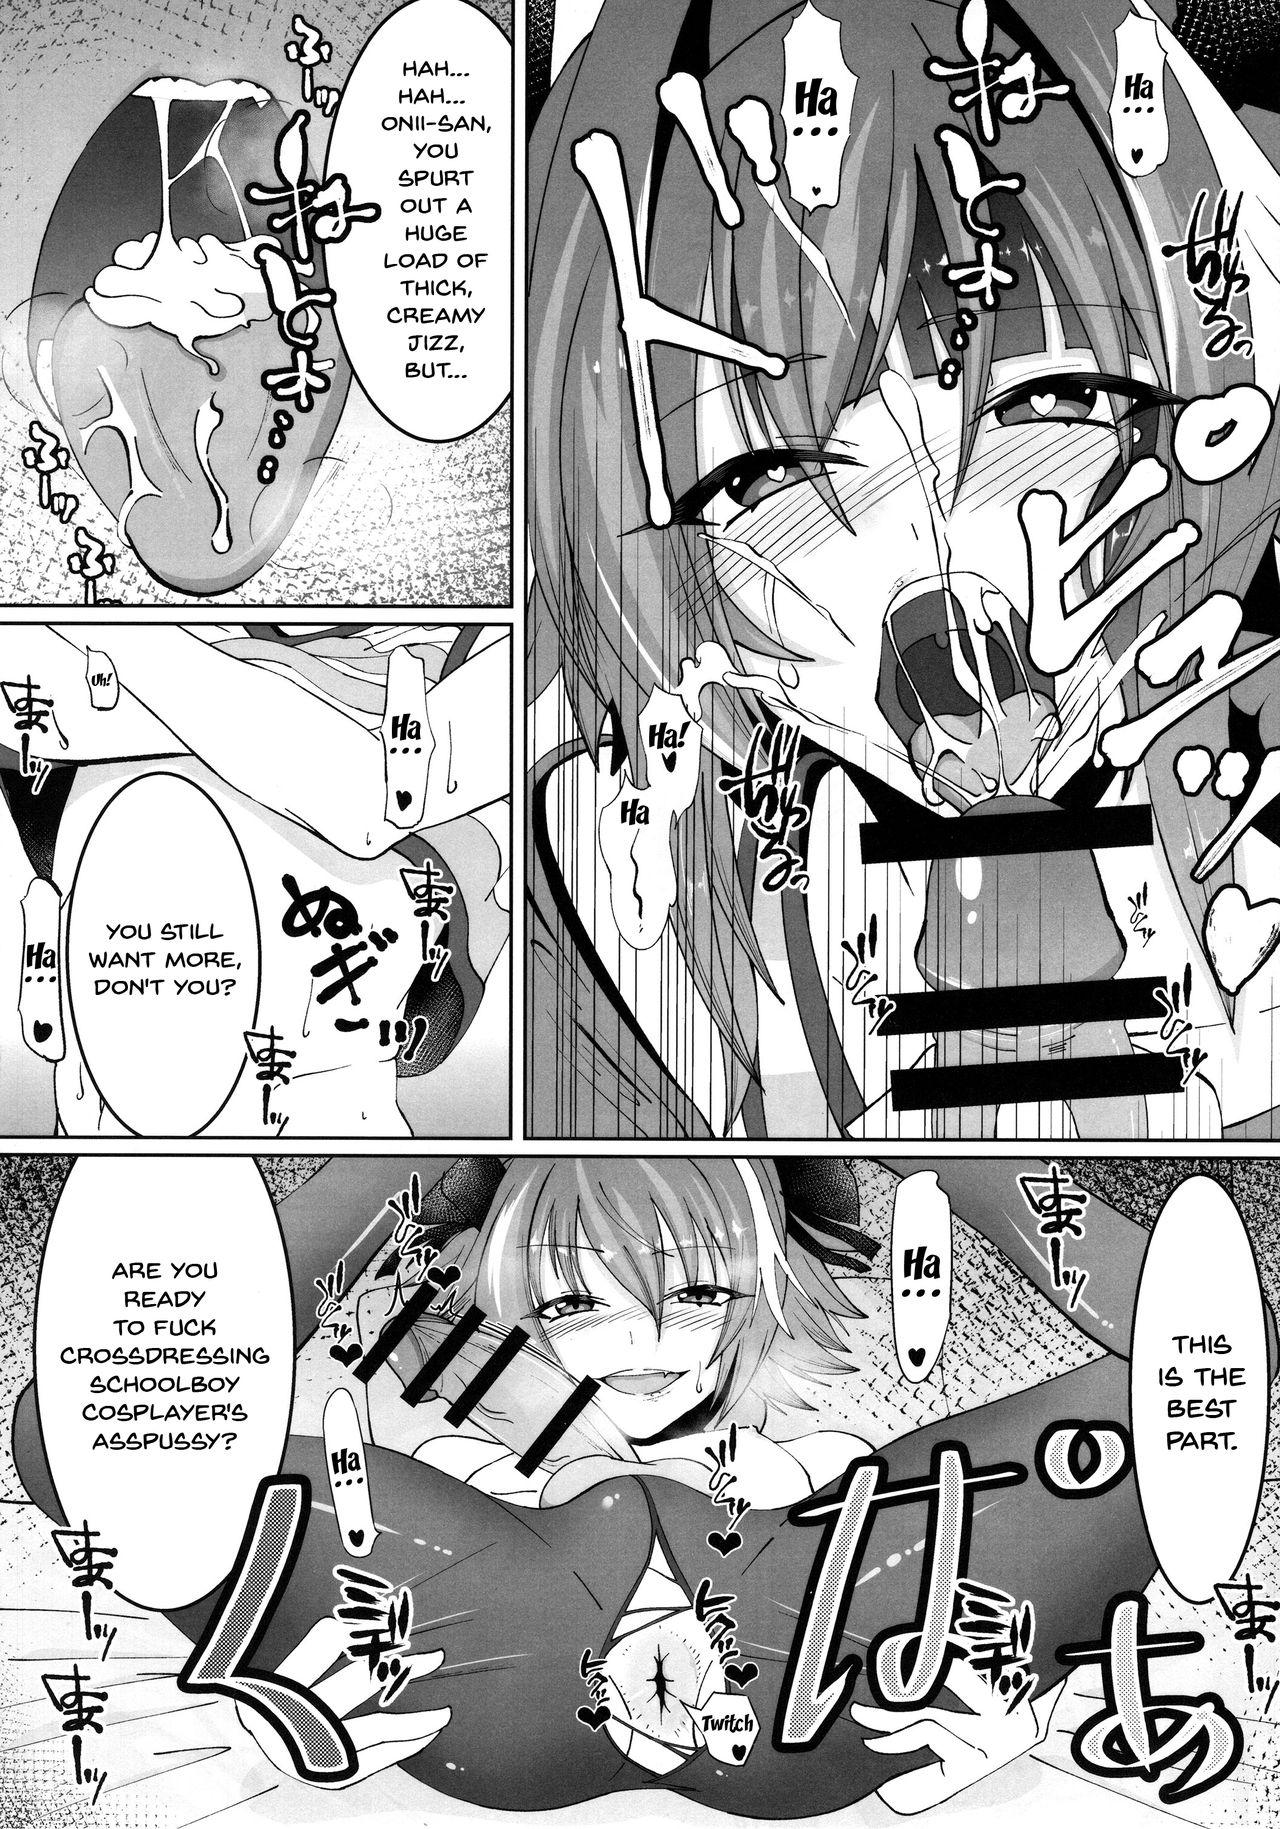 Good Deal With The Devil - Fate grand order Pick Up - Page 9